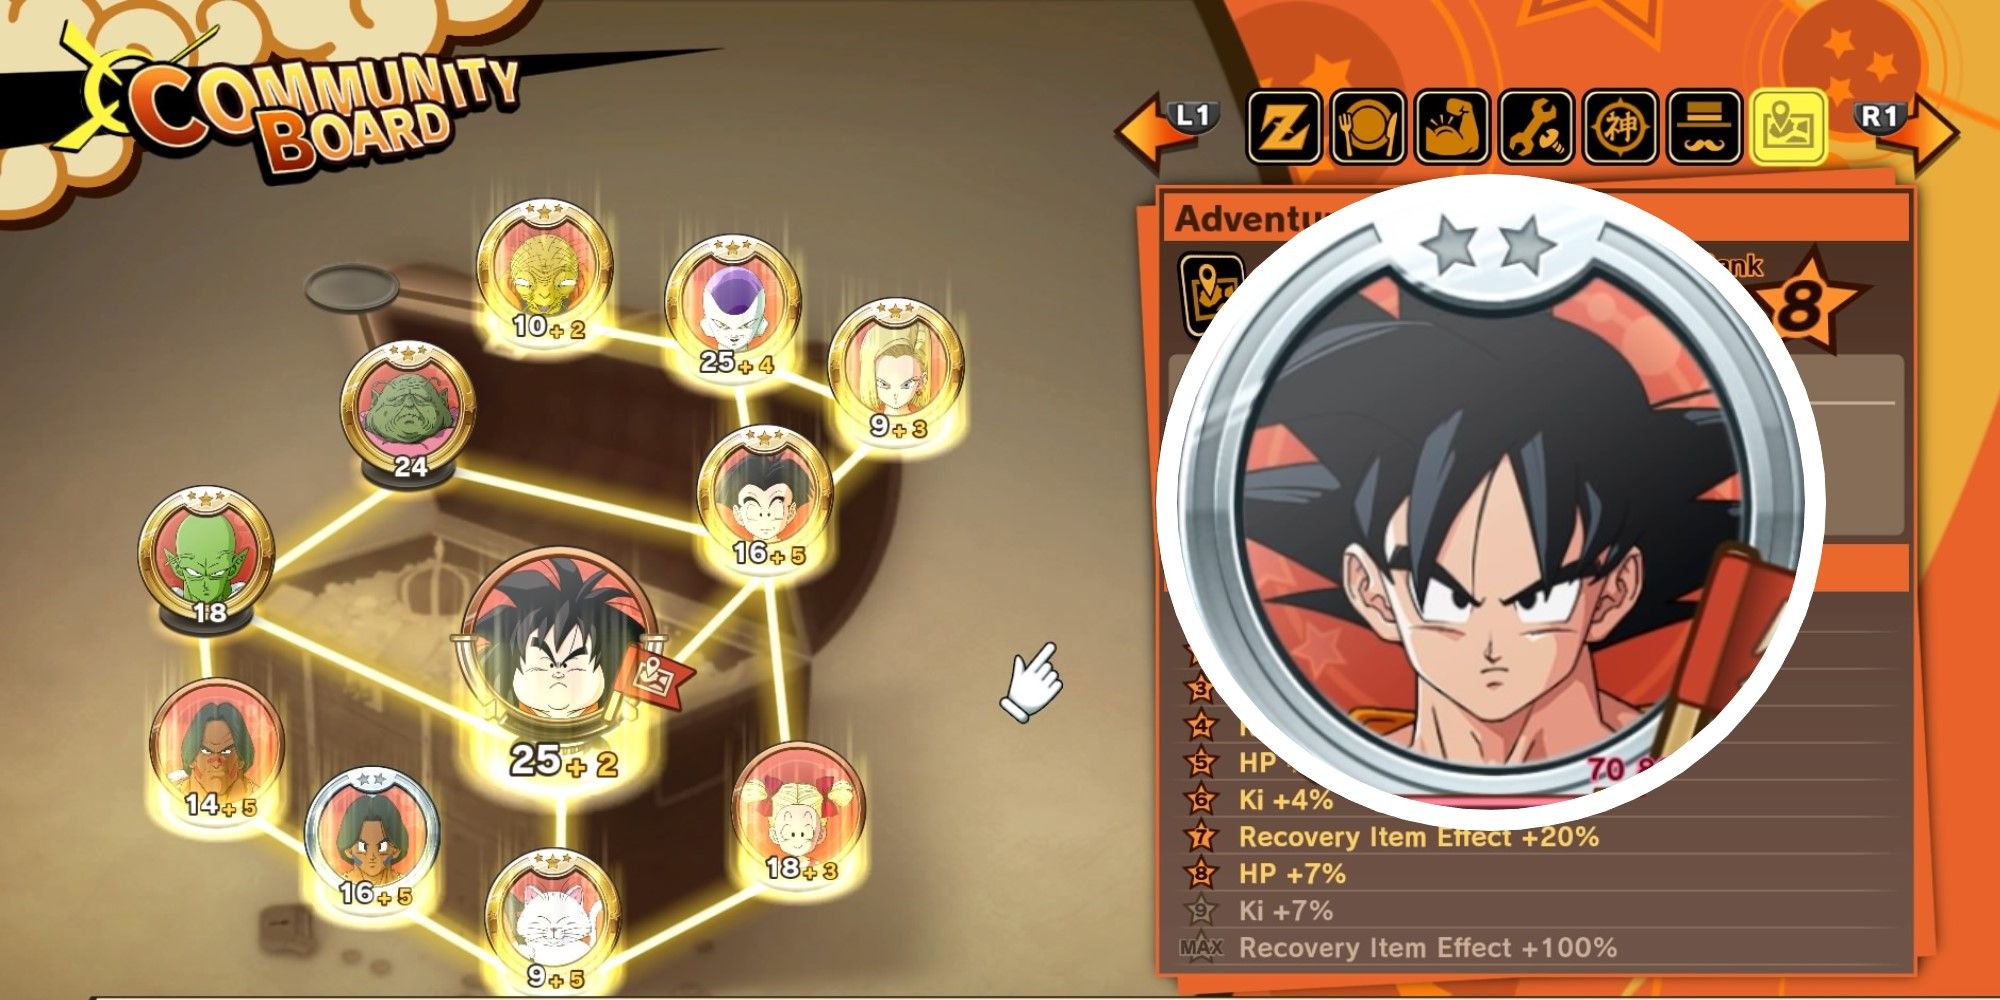 Dragon Ball Z Kakarot' Soul Emblems guide: How to use Community Boards